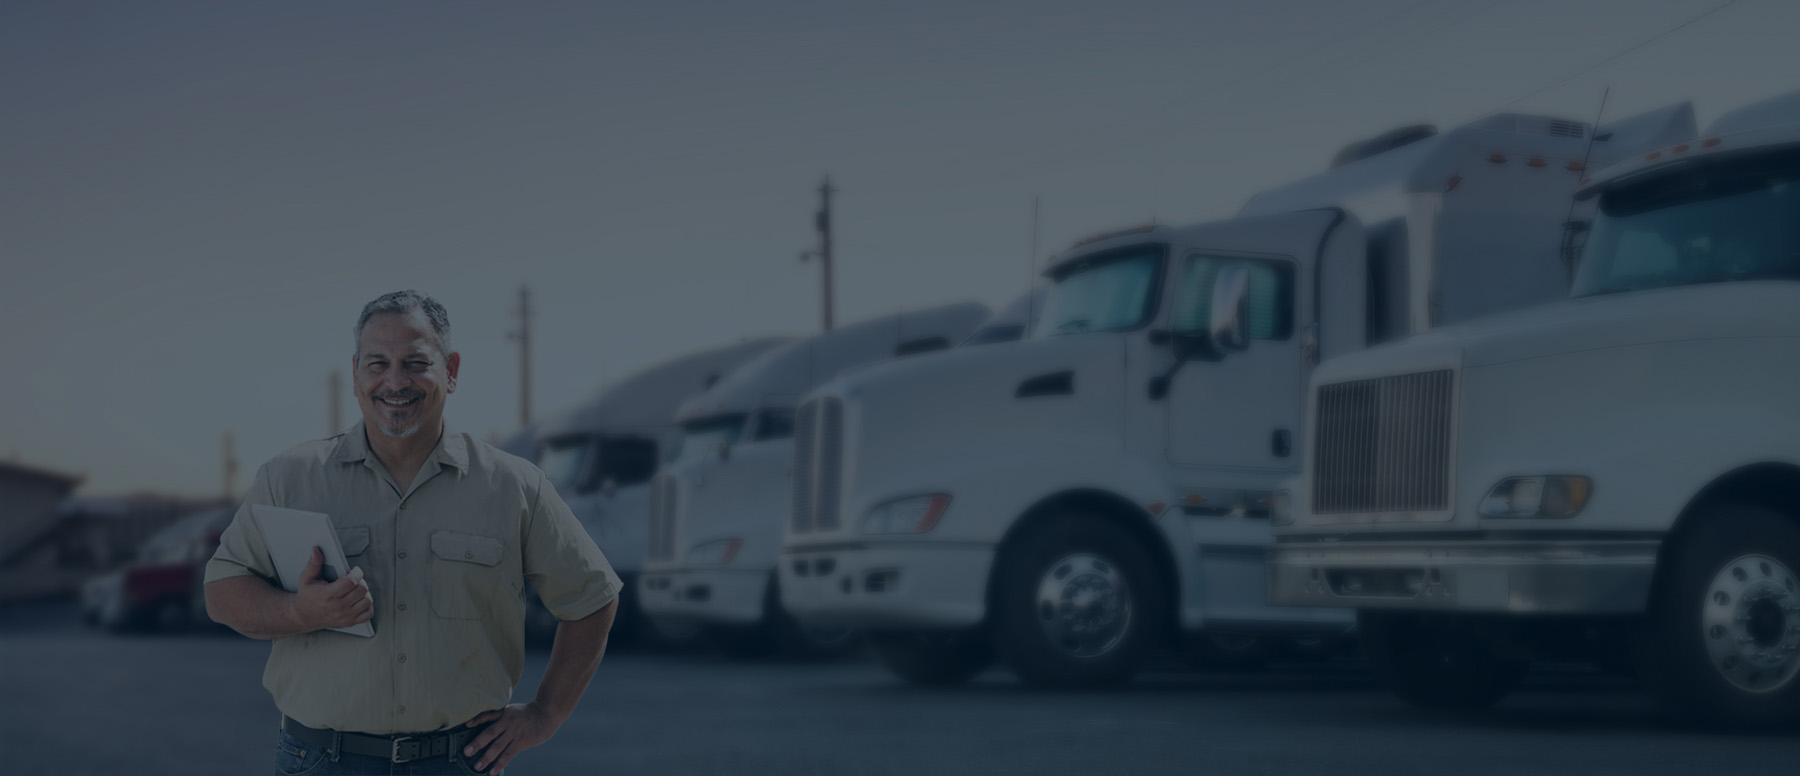 Truck manager smiling in front of transportation trucks